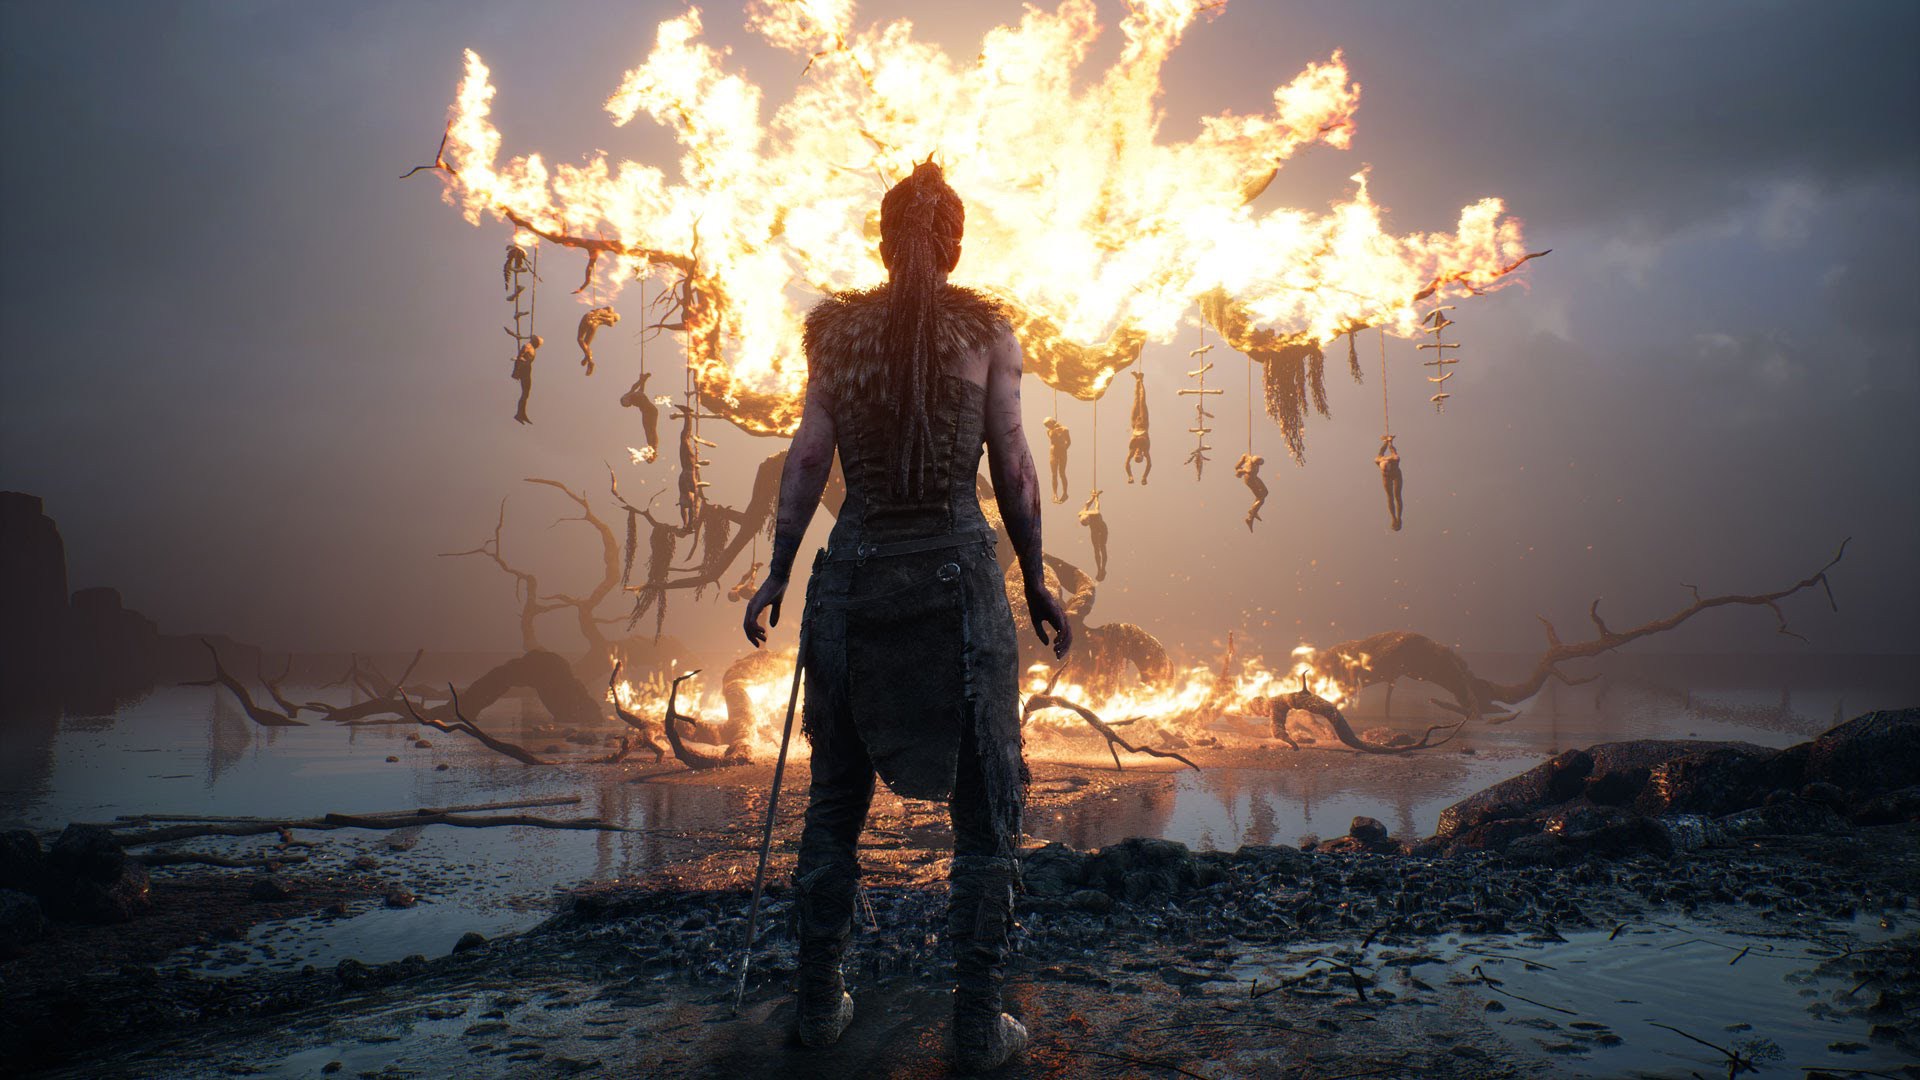 download hellblade 2 game for free